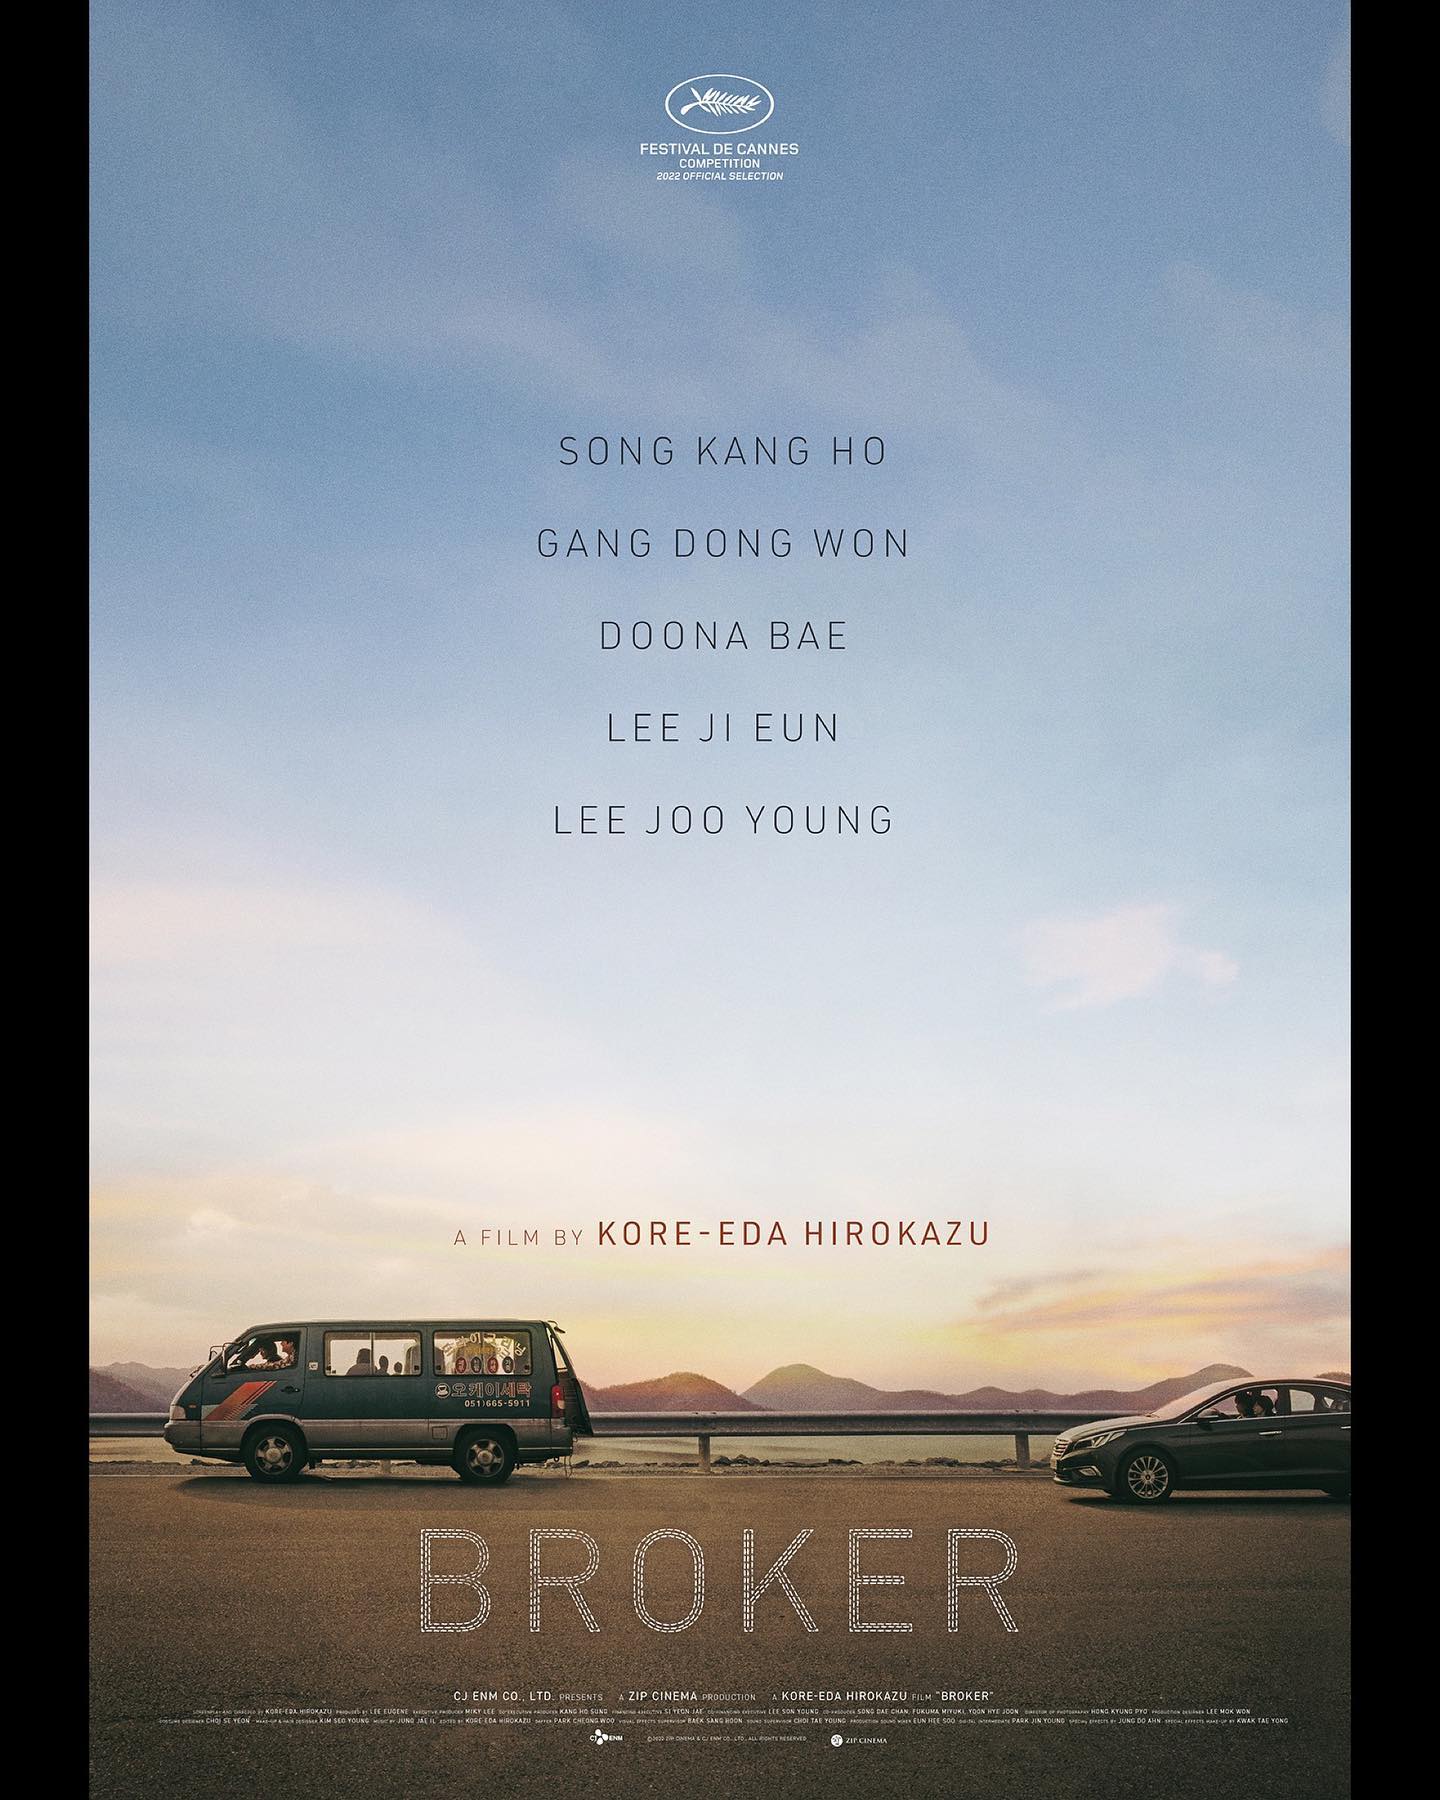 Hirokazu Kore-eda’s Latest Feature Film “ #Broker ” has won the   #EcumenicalJuryAward for Best Film at the 2022  #CannesFilmFestival !

The film took home two major awards at the festival with lead actor Song Kang-Ho winning the “Broker” is Hirokazu Kore-eda’s first feature film set in Korea. GAGA, Fuji Television Network and AOI Pro. distributed the film in Japan.
@festivaldecannes

 2022 ZIP CINEMA & CJ ENM Co., Ltd., ALL RIGHTS RESERVED